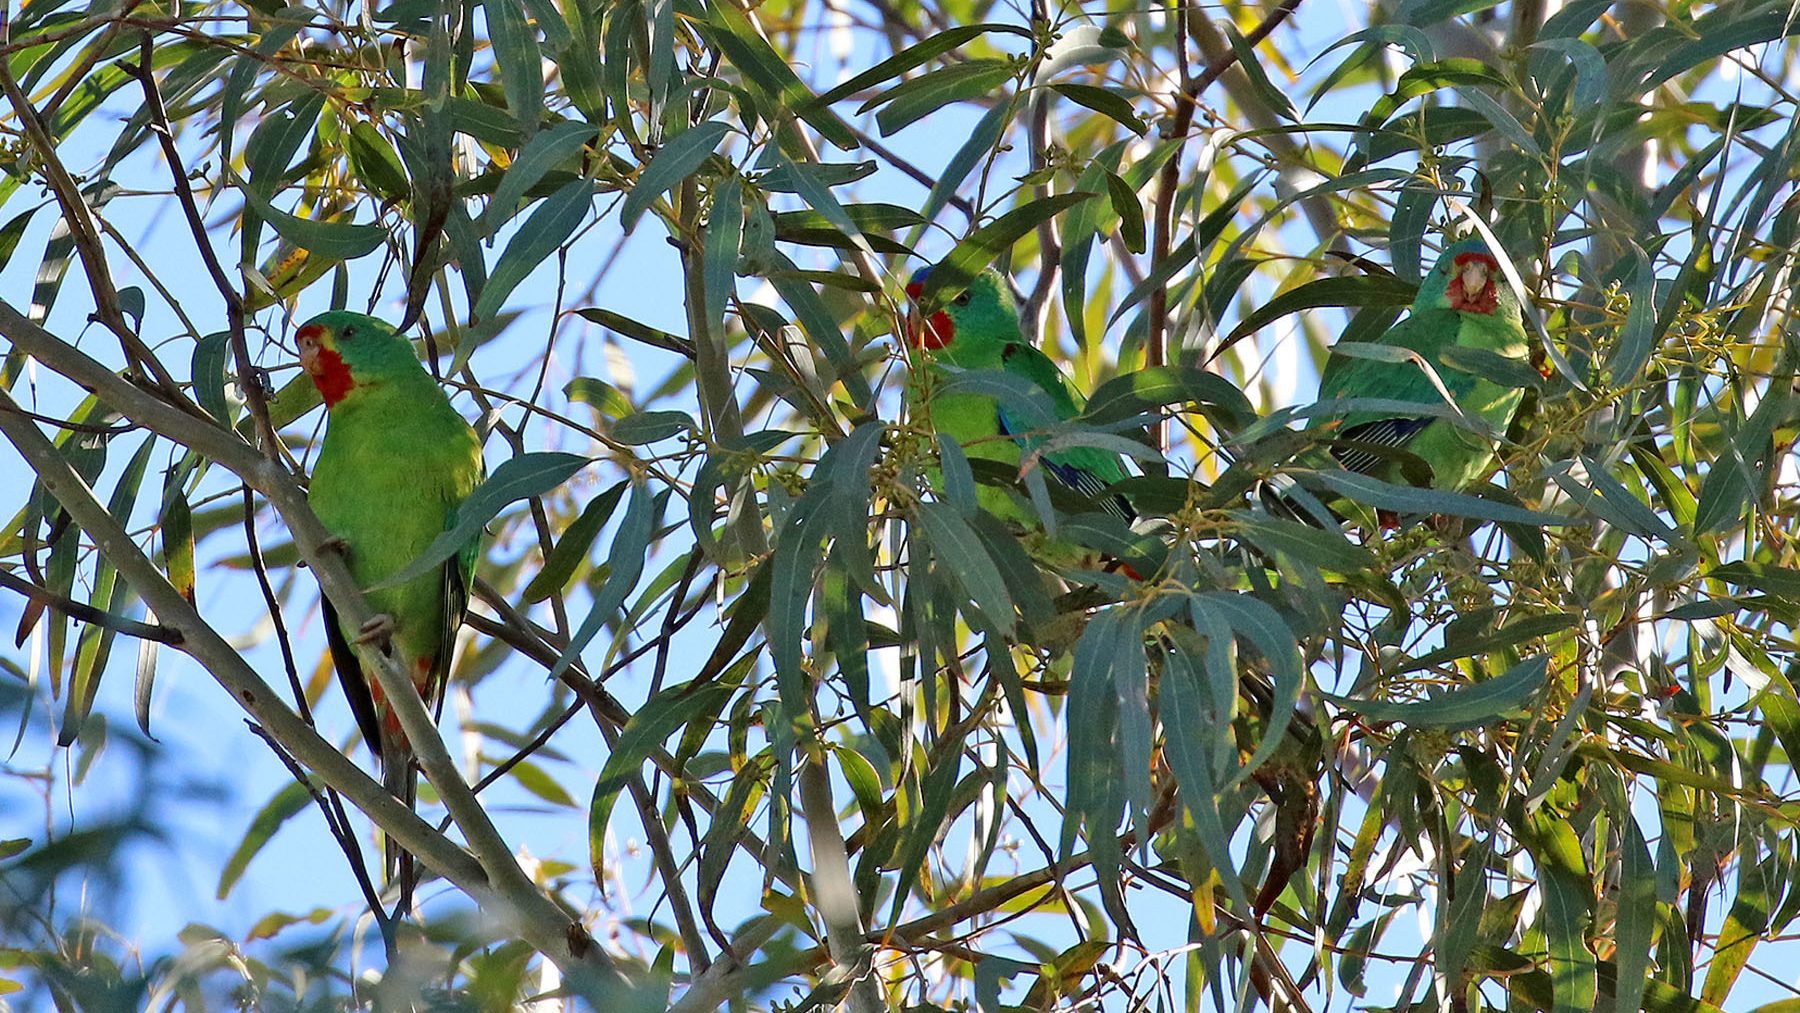 parrots hiding in the leaves